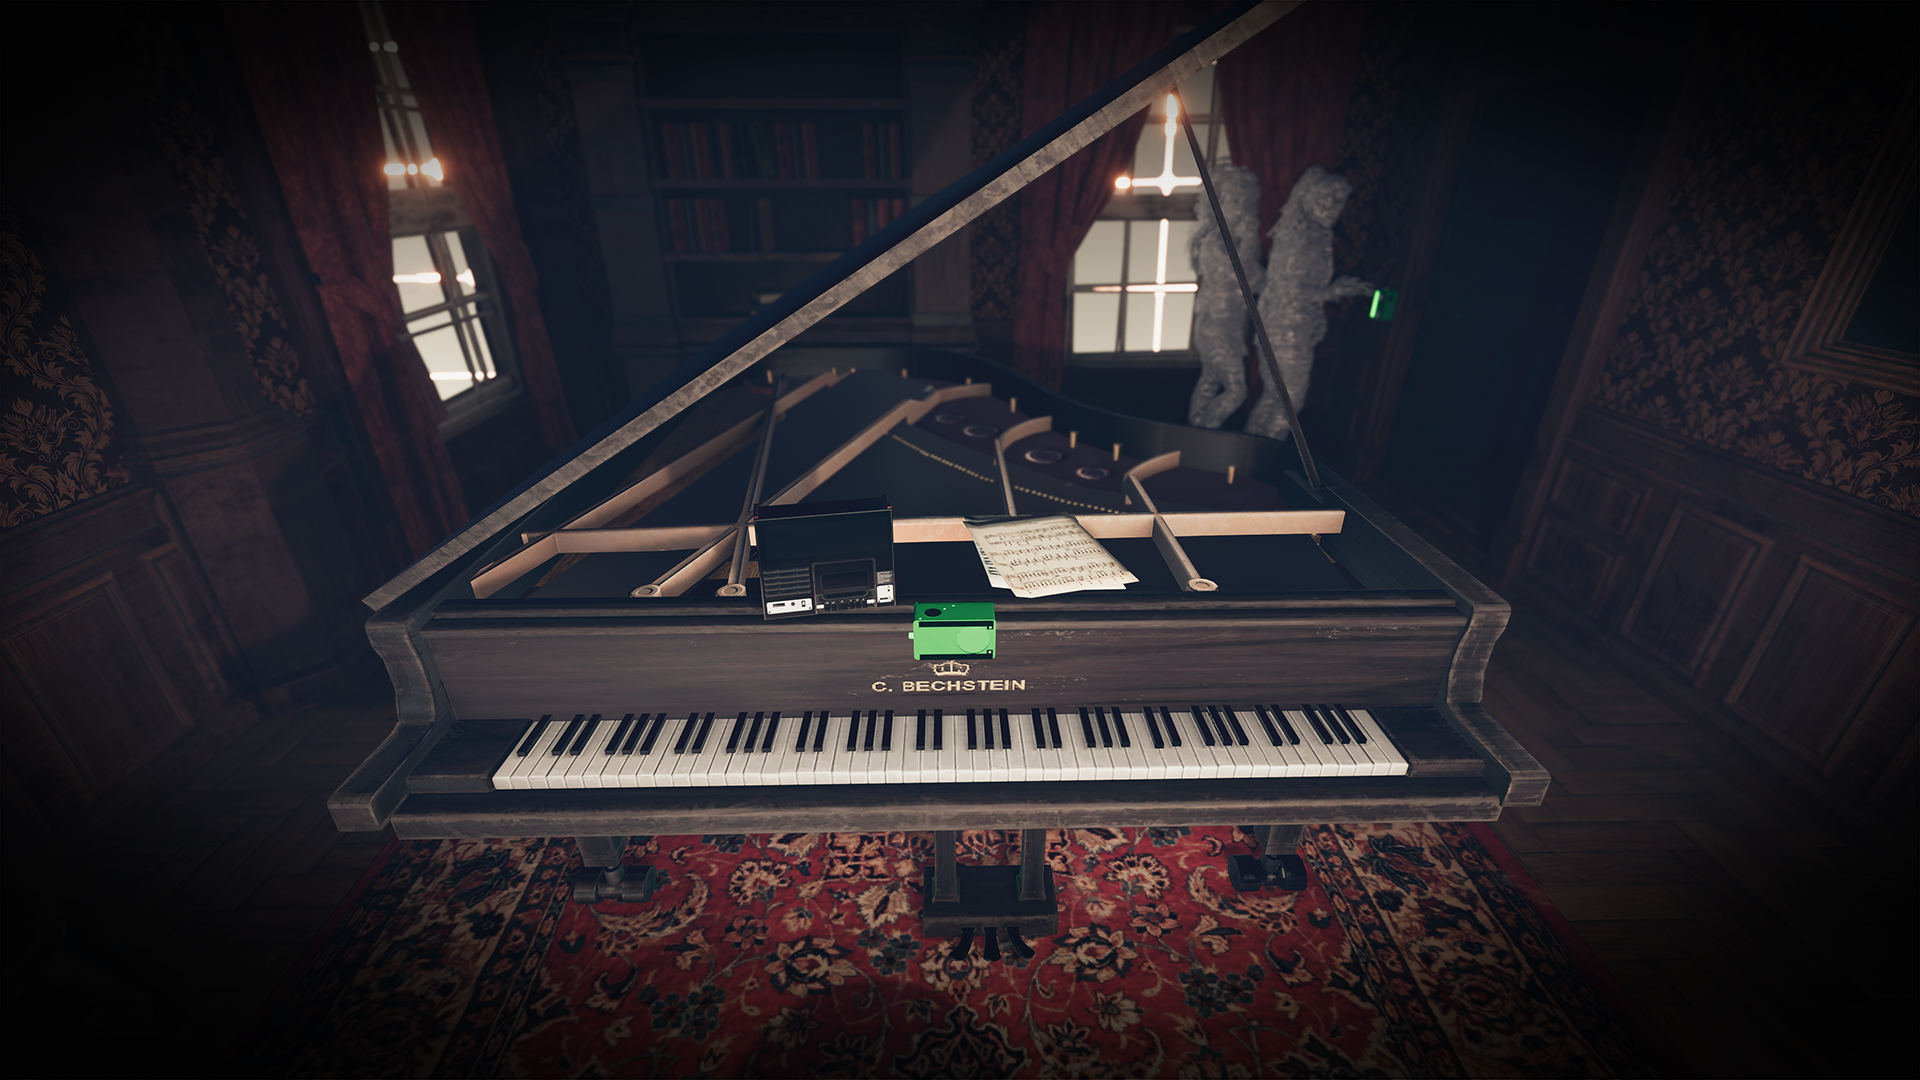 Played the Piano